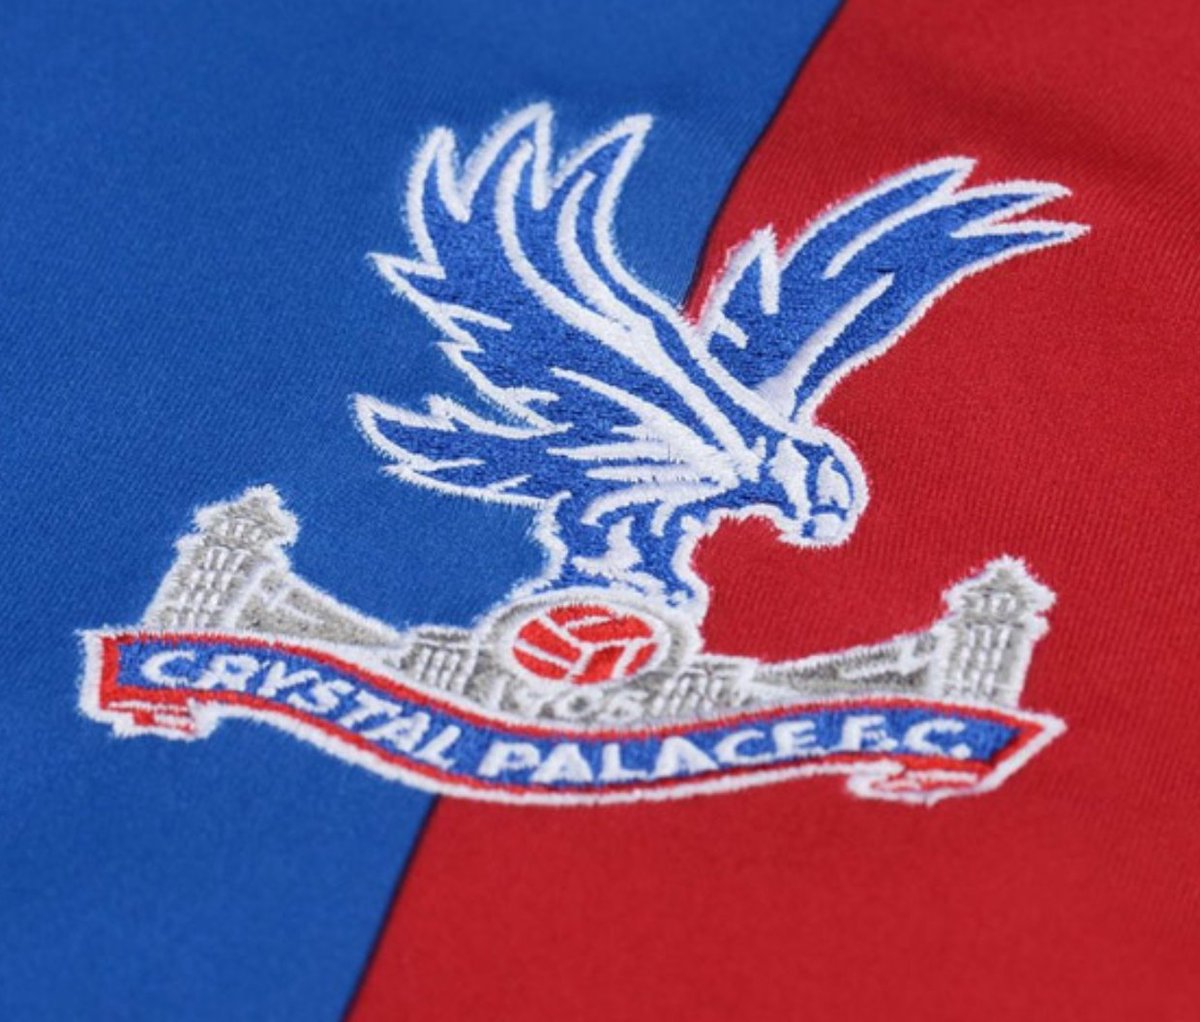  #FPL FIXTURES THREAD - CRYSTAL PALACE SOU, manu, EVE, che Difficult to see points away from home in these 4. Neither home match will be easy. Wait and see for me on the Eagles None GRADE C